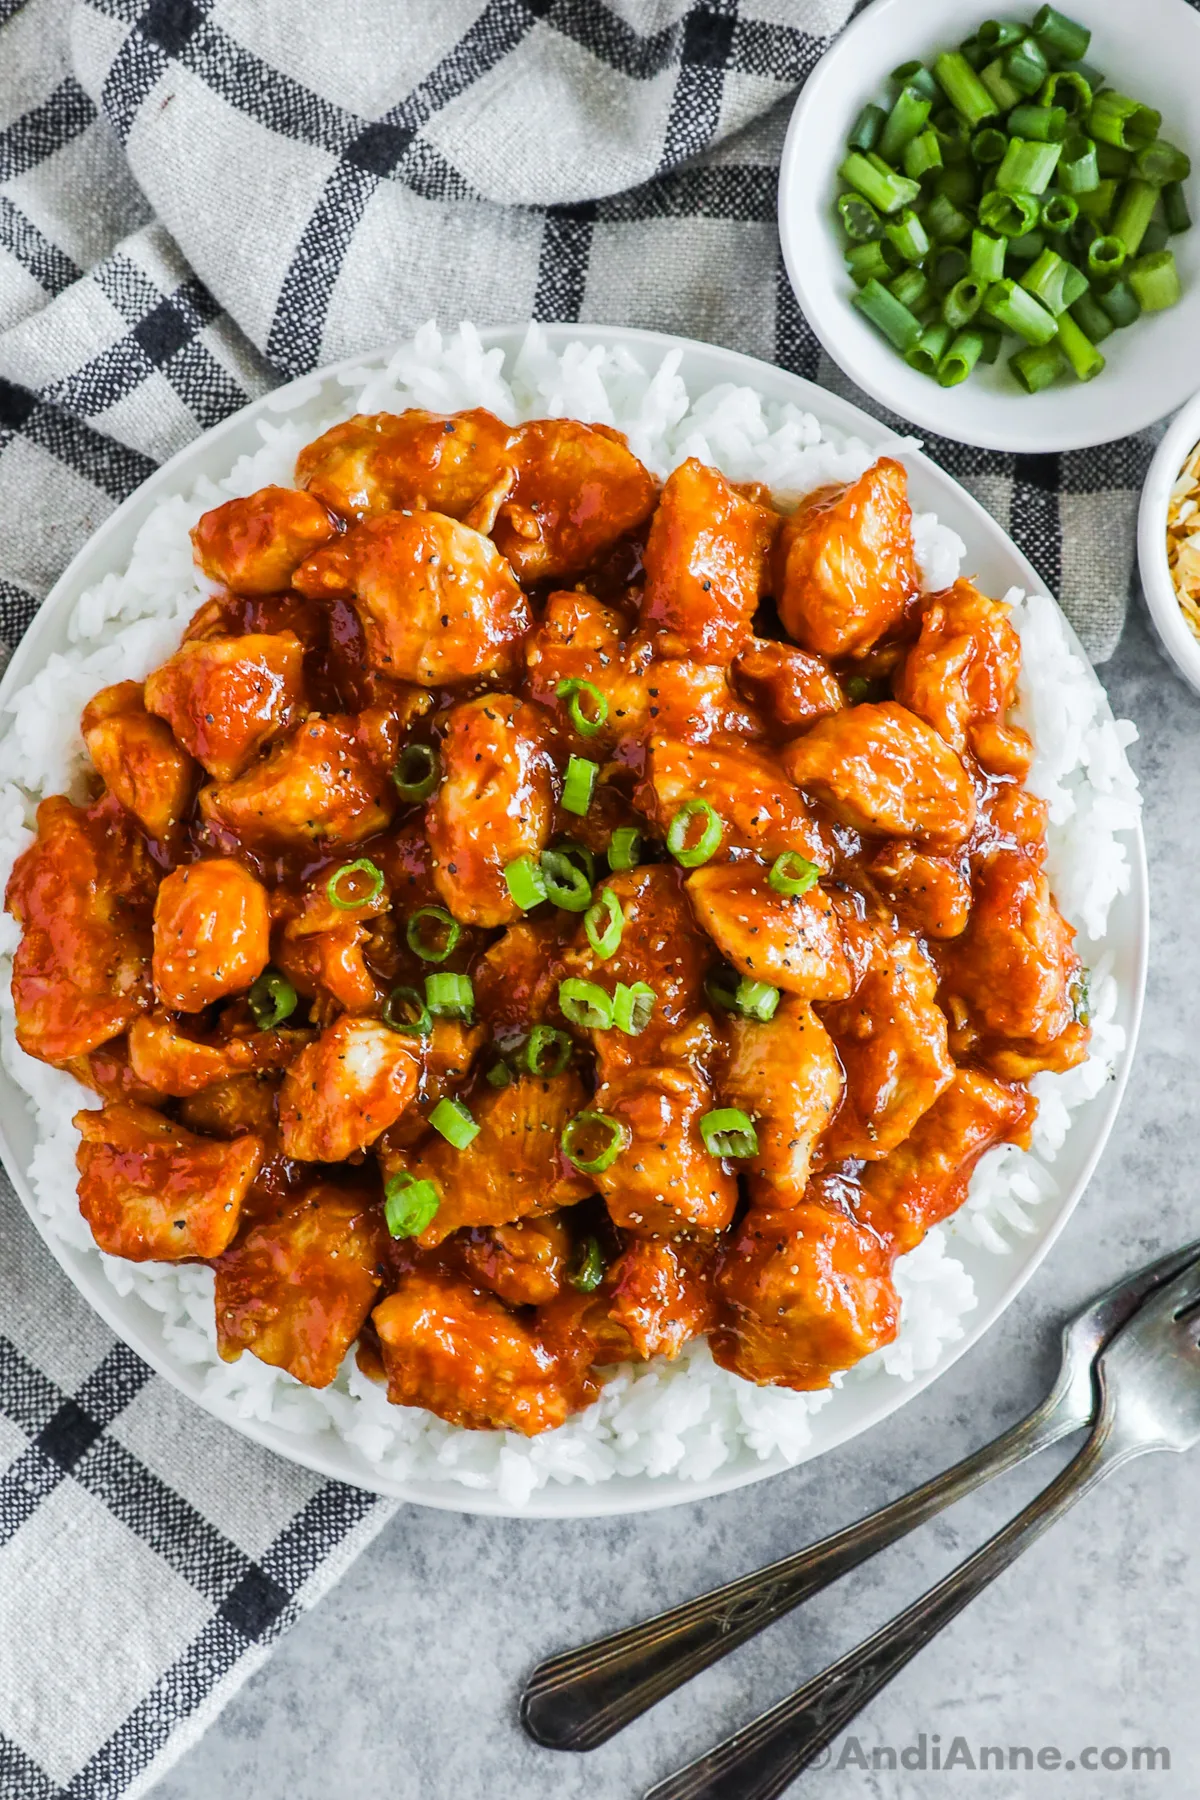 A plated with saucy sweet and sour chicken bites over rice and topped with chopped green onion.